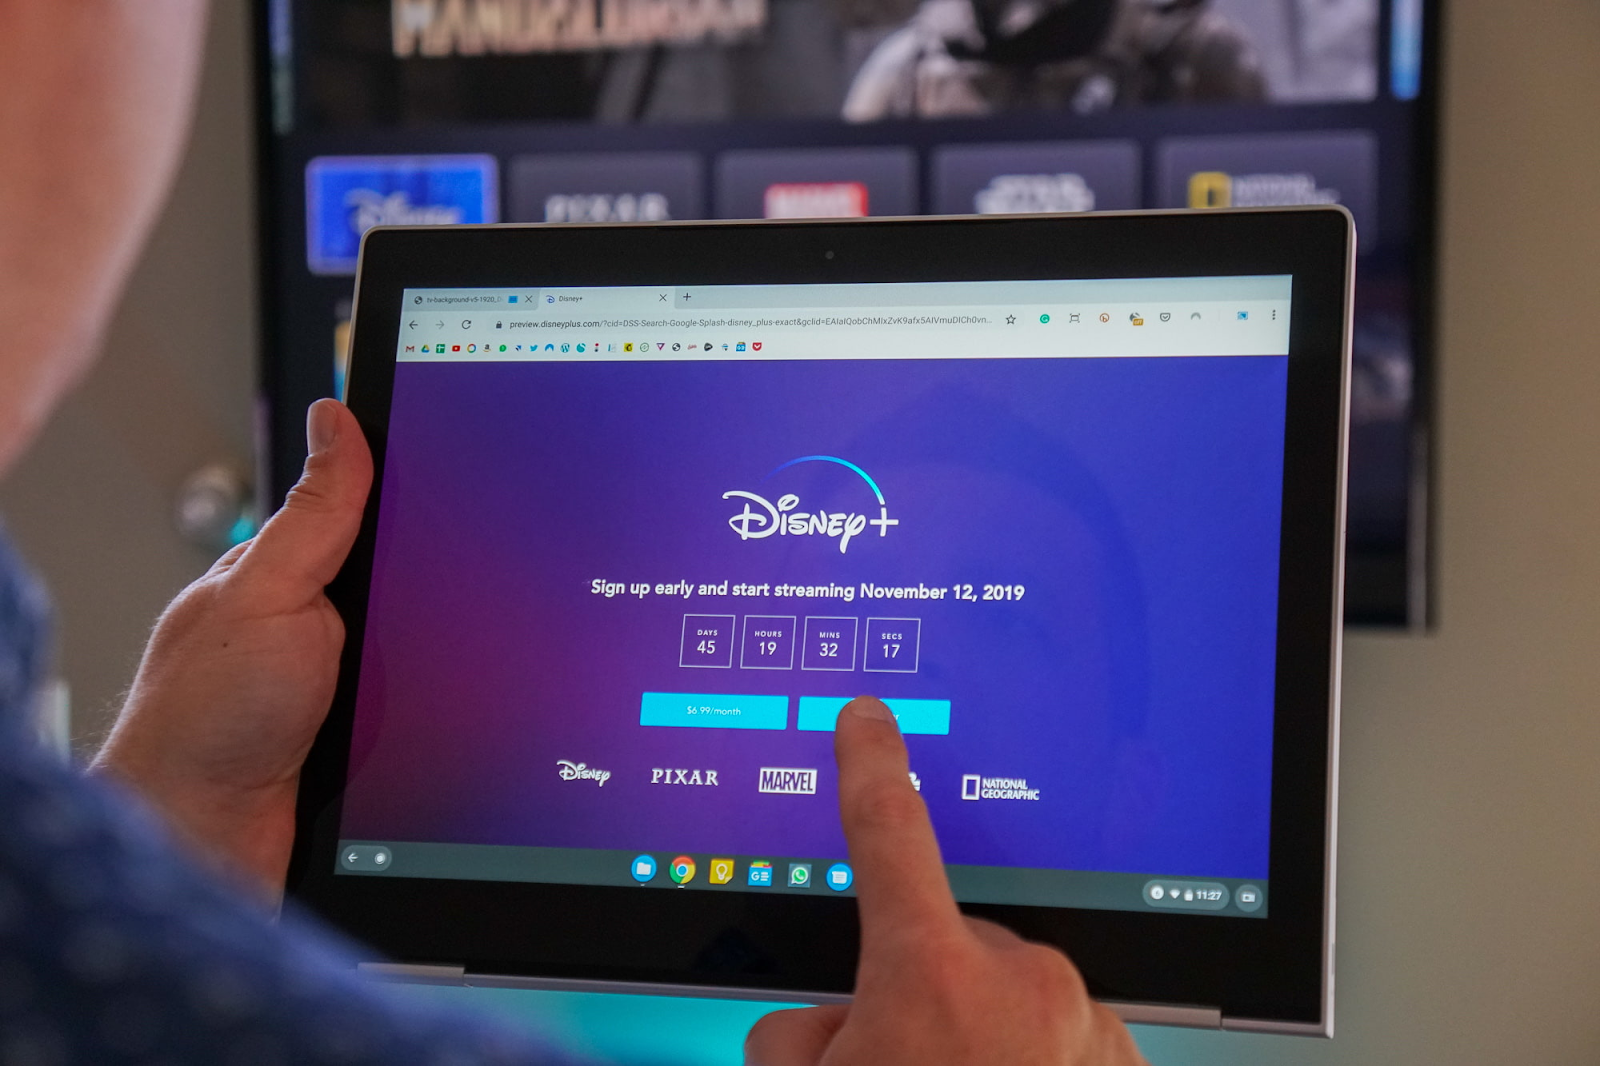 Use a Different Browser when unable to connect to disney+